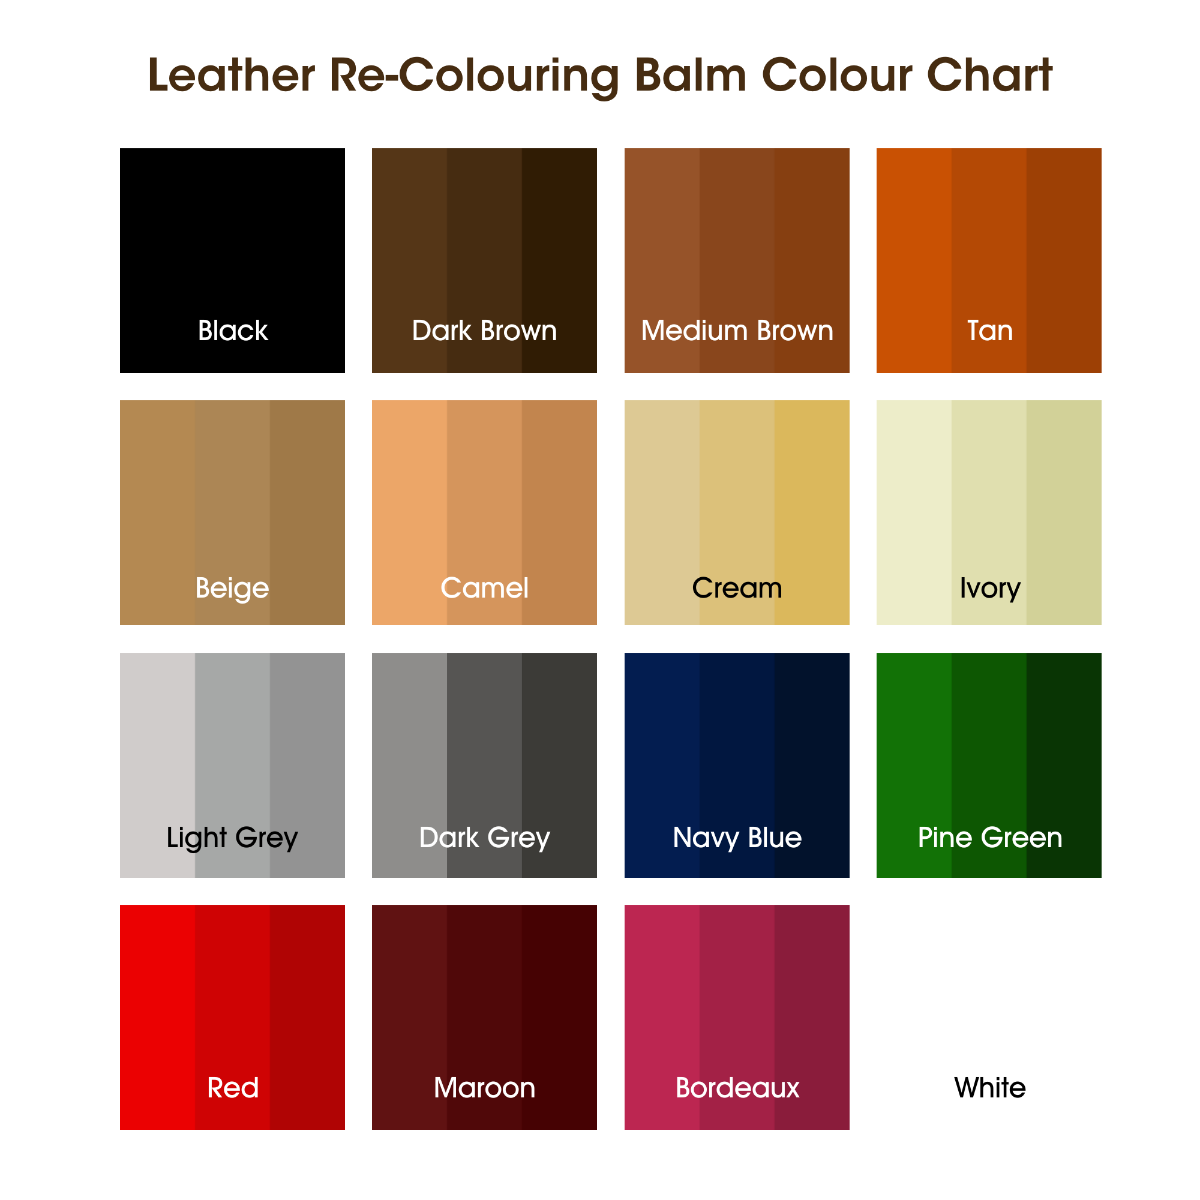 Leather ReColouring Balm Colour Chart